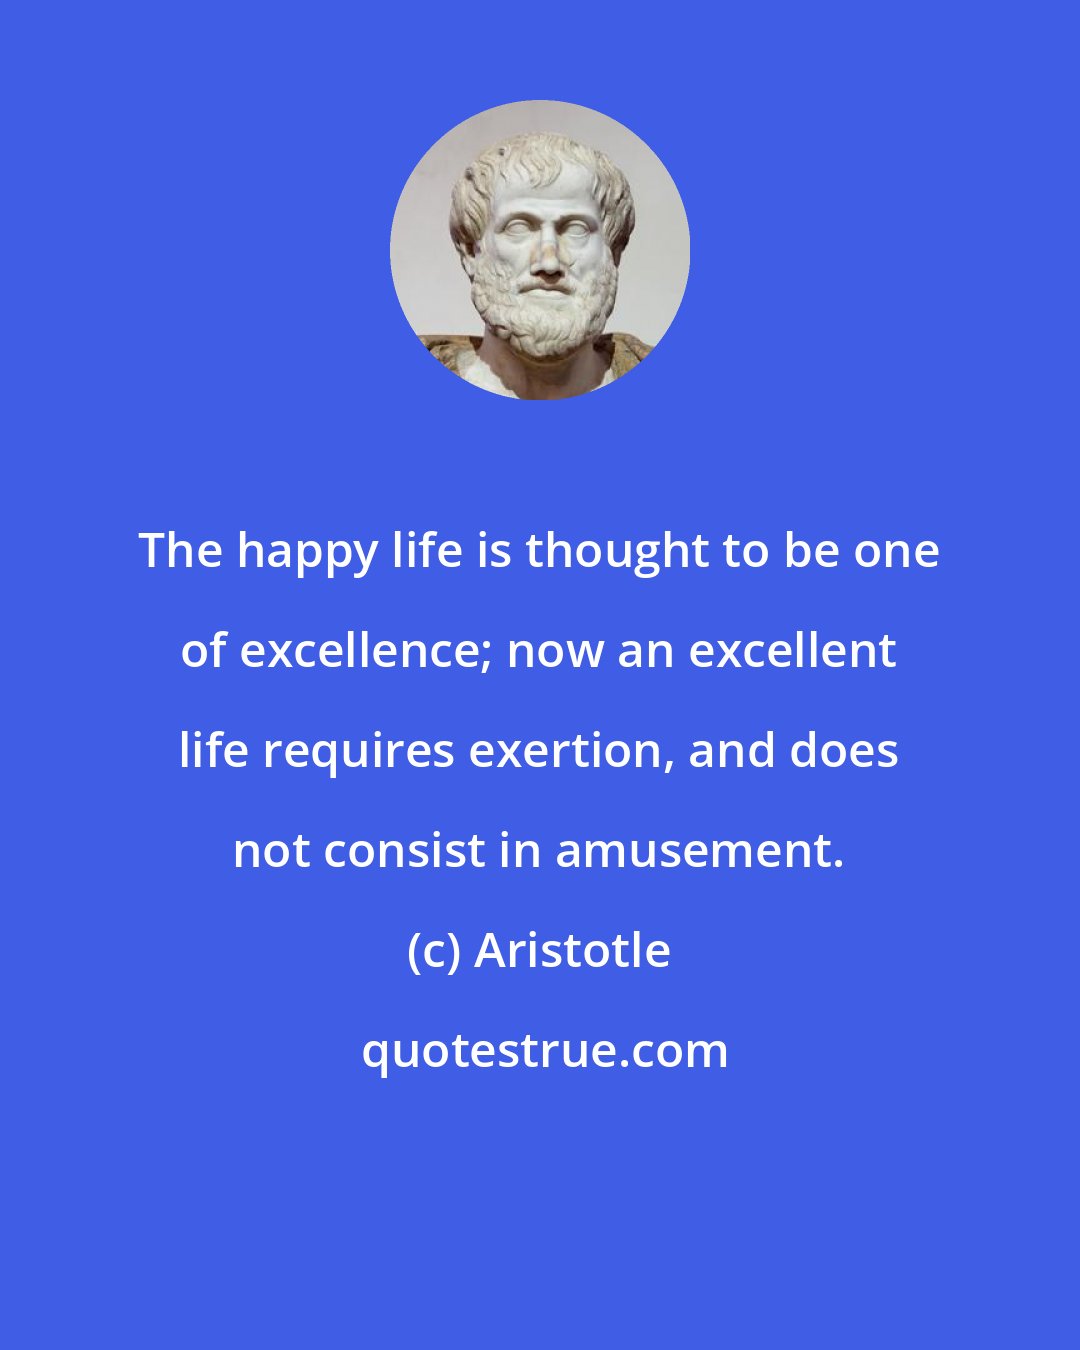 Aristotle: The happy life is thought to be one of excellence; now an excellent life requires exertion, and does not consist in amusement.